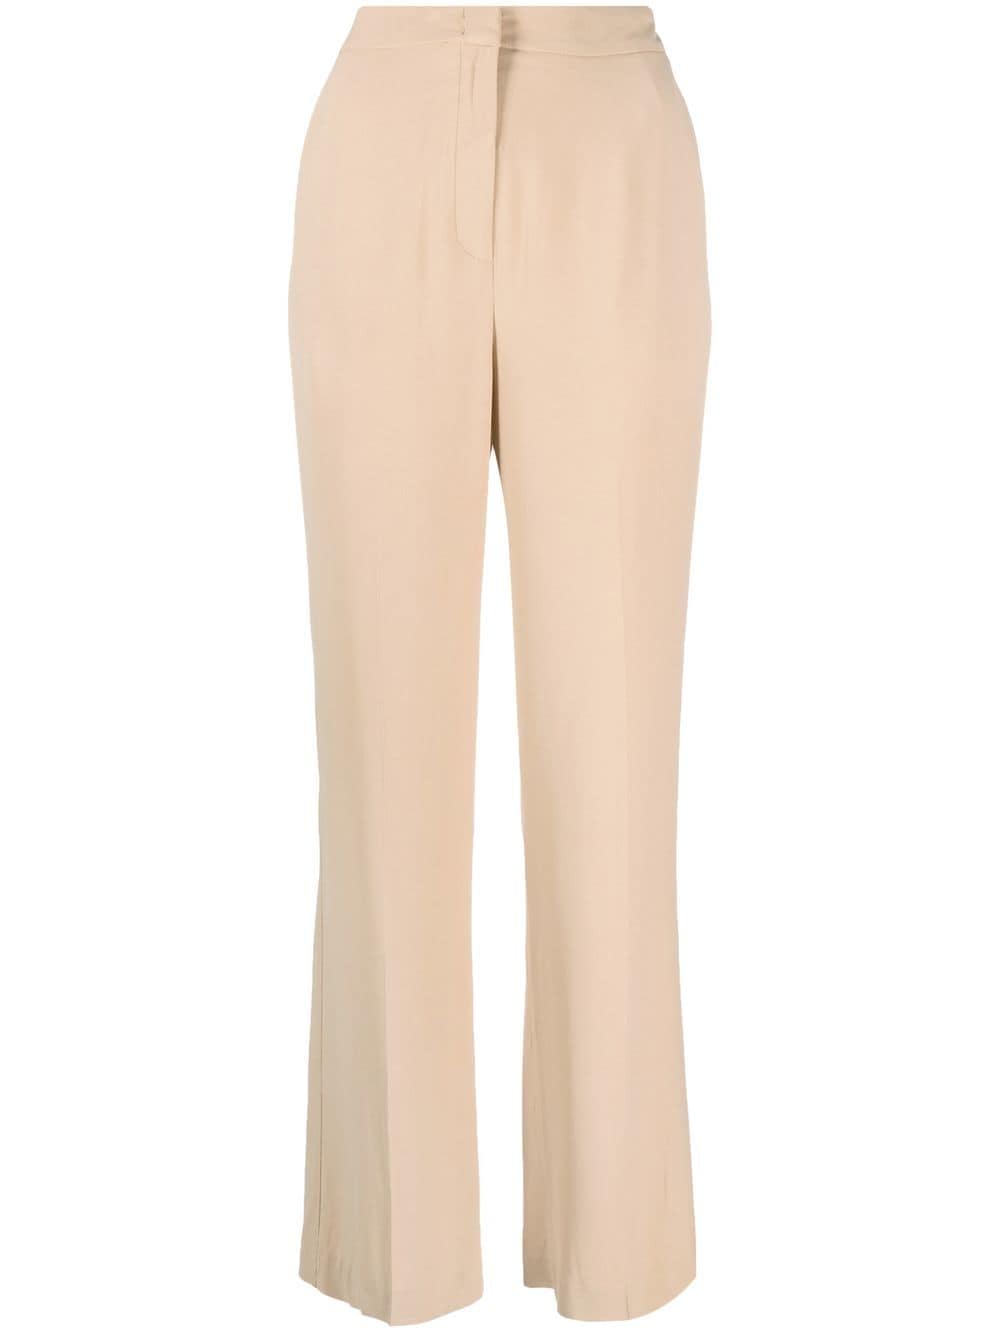 Federica Tosi high-waisted tailored trousers - Neutrals von Federica Tosi